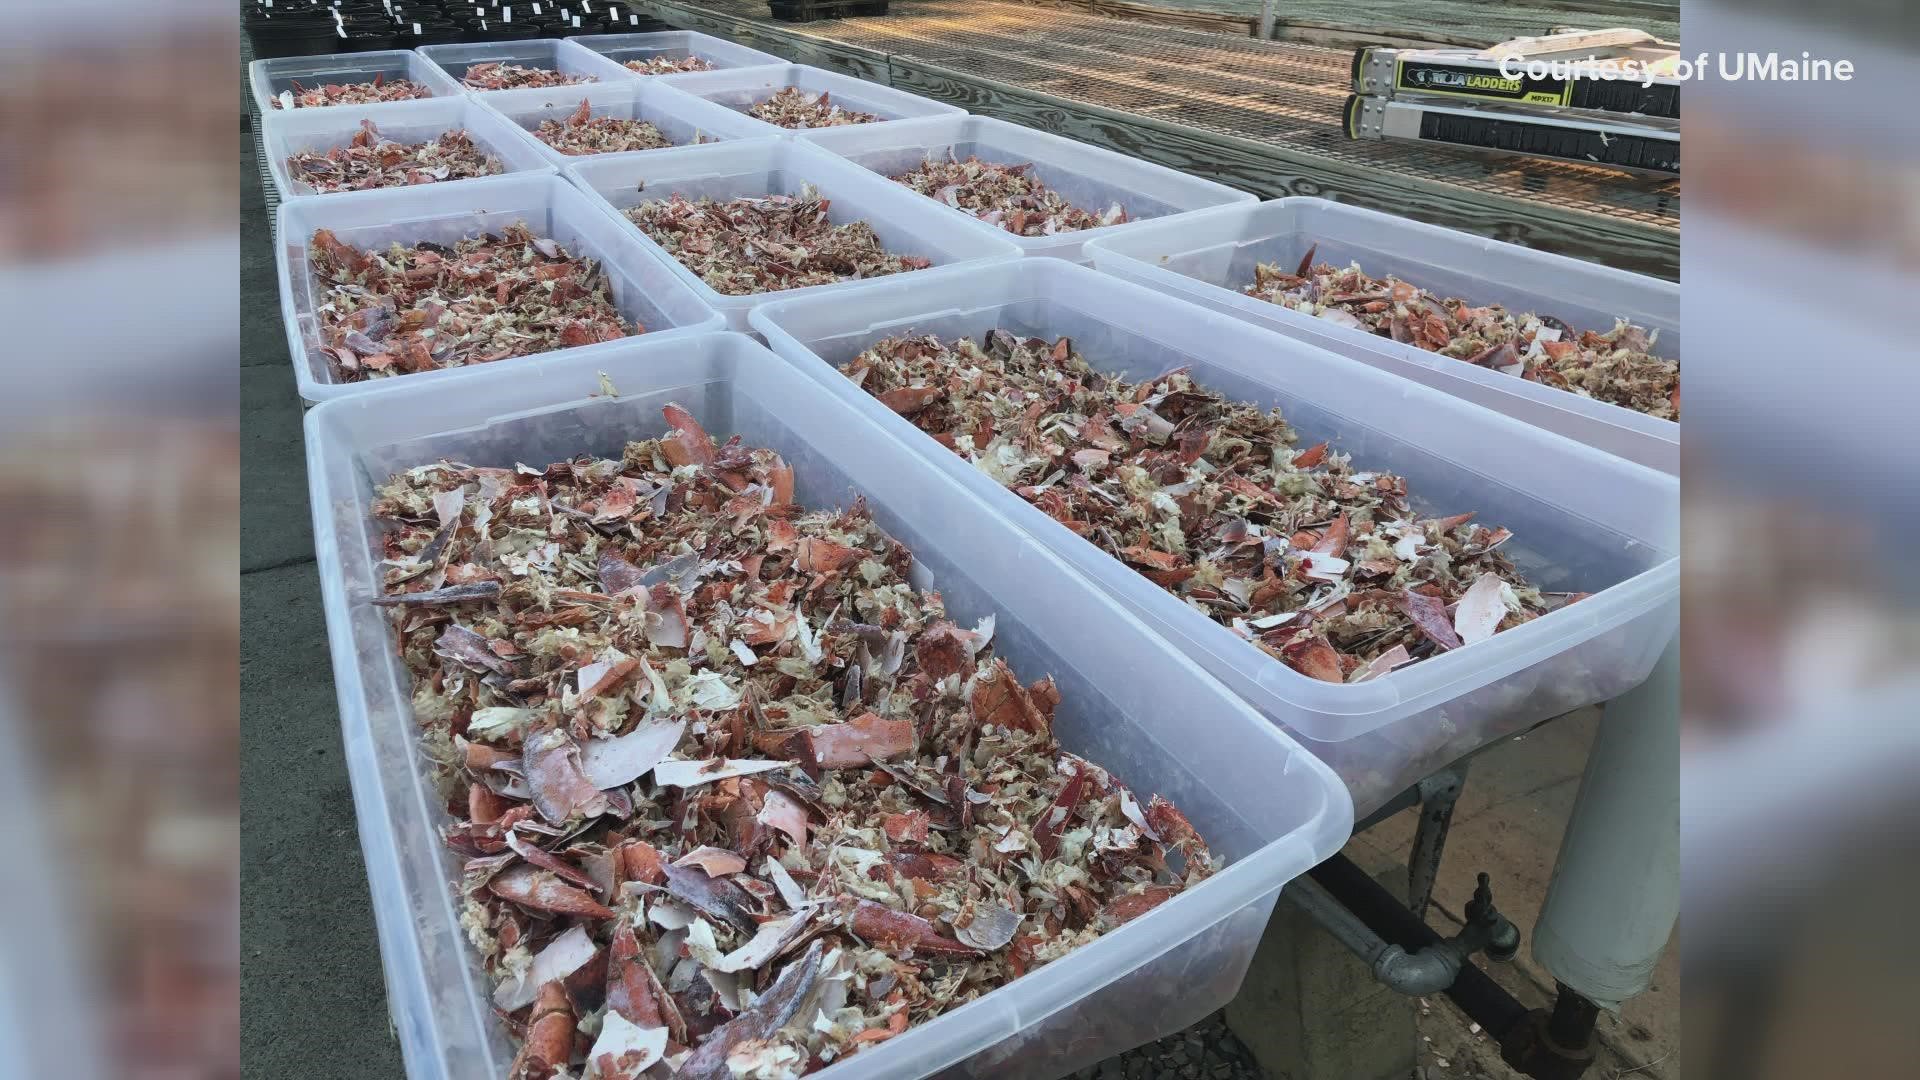 Researchers hope to bridge both the potato and lobster industries in the state.